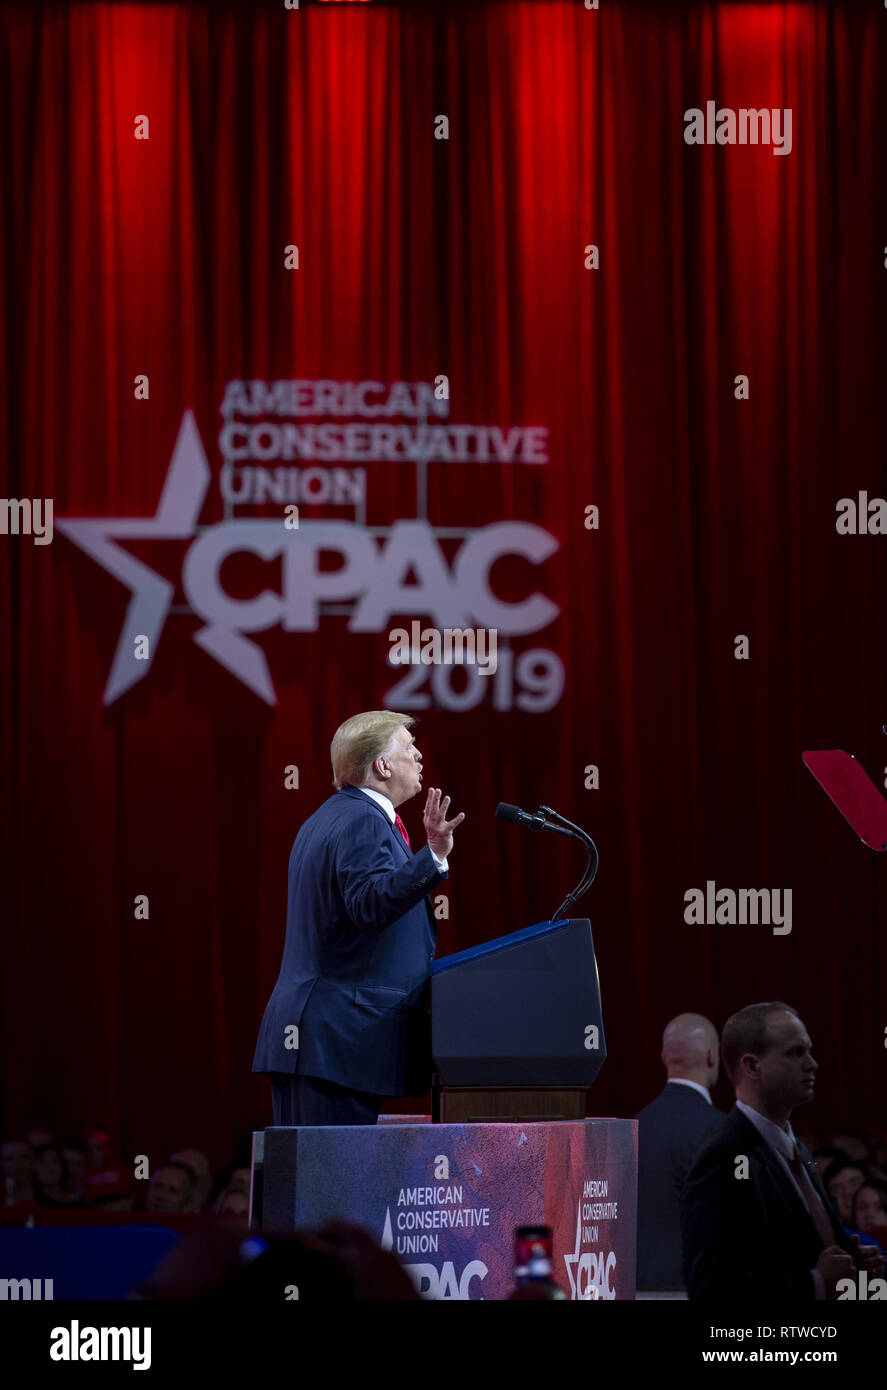 Washington, DC. 02nd Mar, 2019. U.S. President Donald Trump speaks during CPAC 2019 on March 02, 2019 in Washington, DC. The American Conservative Union hosts the annual Conservative Political Action Conference to discuss conservative agenda. Credit: Tasos Katopodis/Pool via CNP | usage worldwide Credit: dpa/Alamy Live News Stock Photo